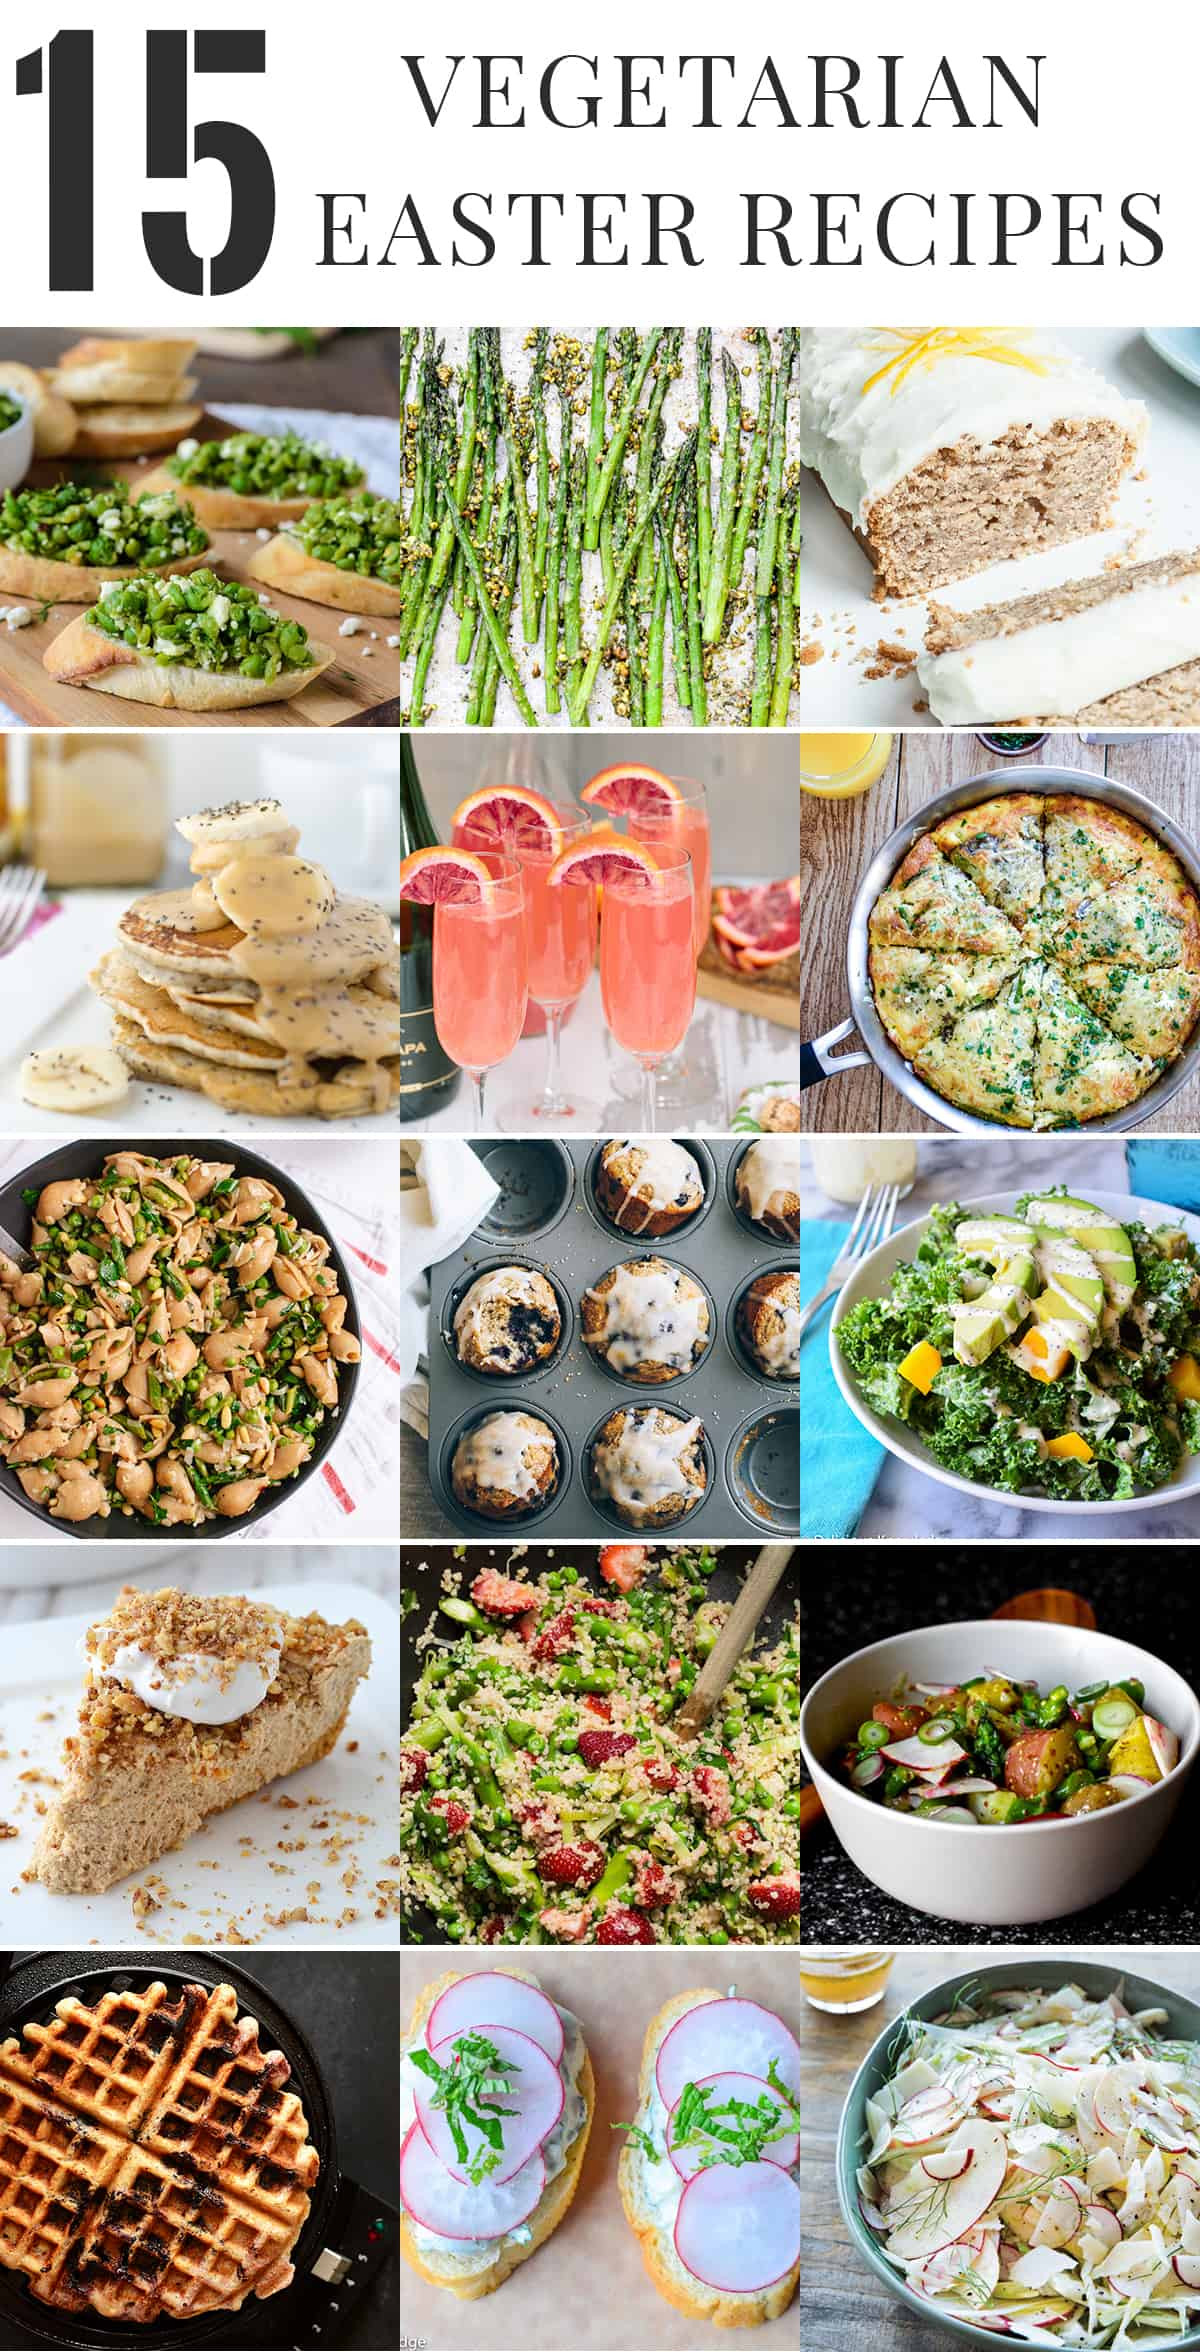 Vegetarian Recipes For Easter Dinner
 Healthy Ve arian Easter Recipes Delish Knowledge